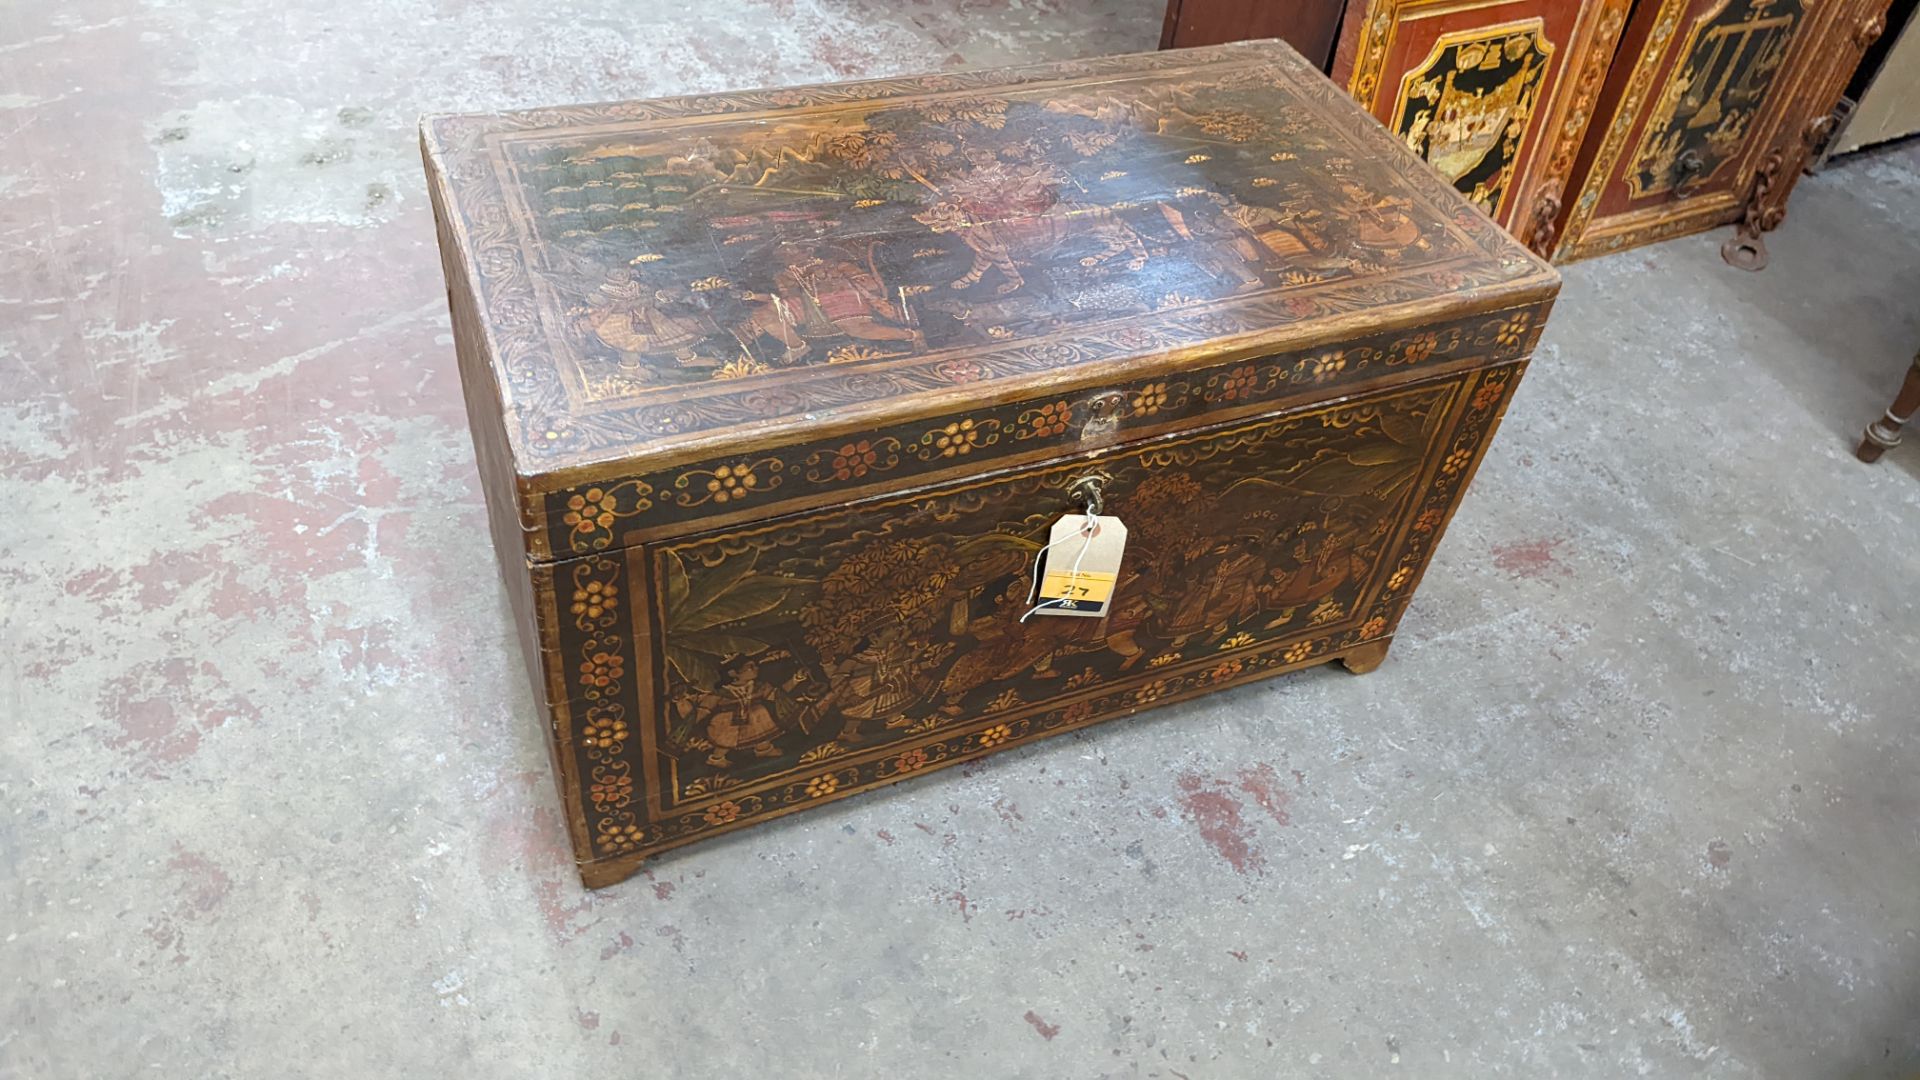 Mughal Indo Persian style large chest with extensive paintwork as pictured